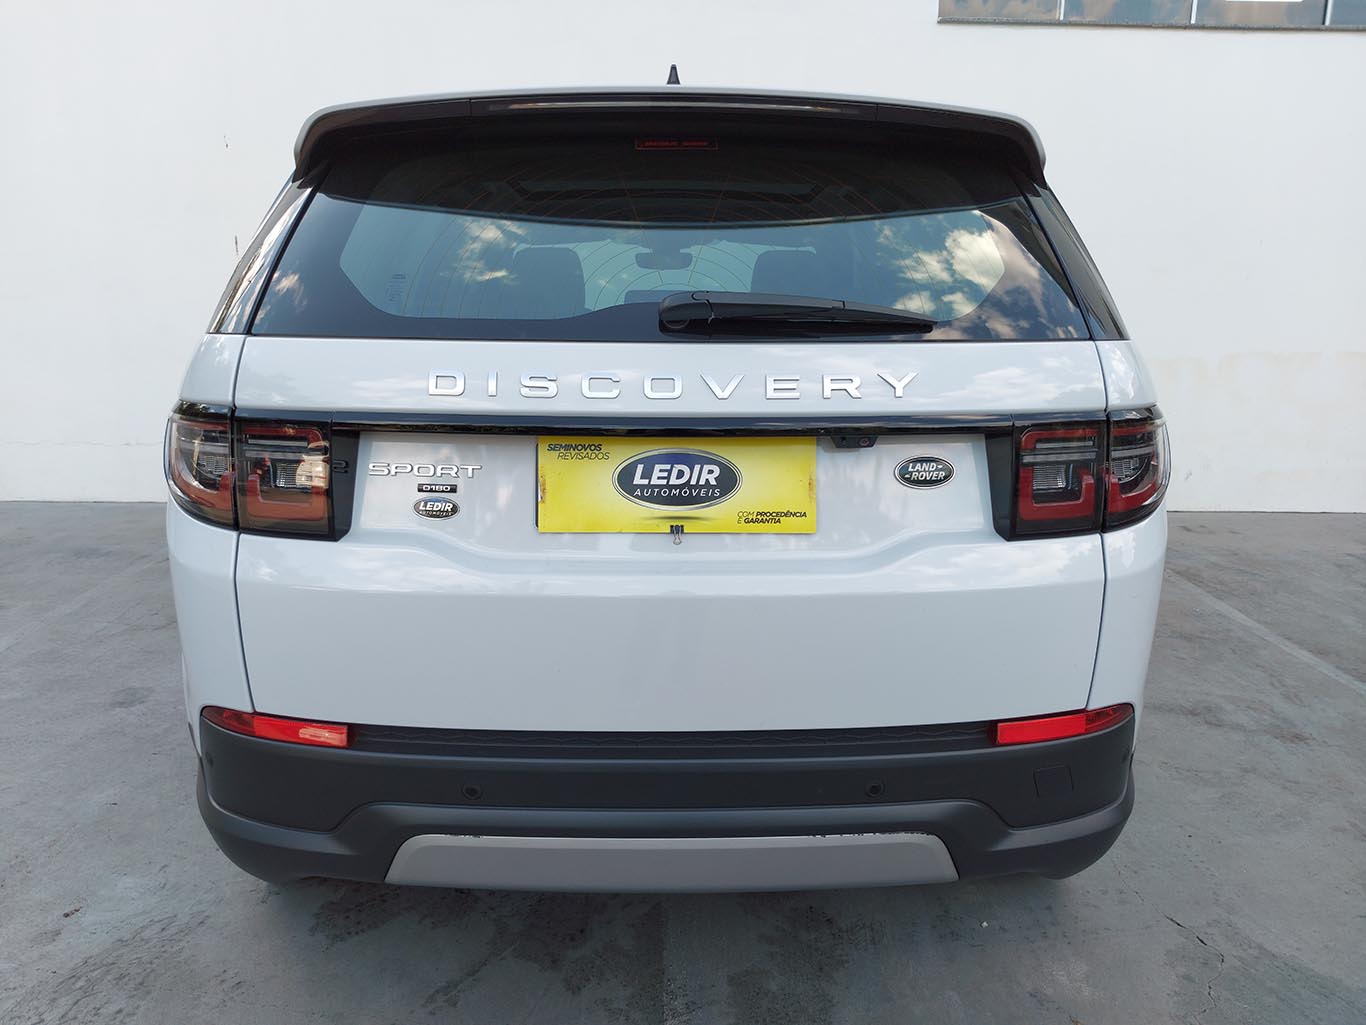 LAND ROVER DISCOVERY SPORT SE 2.0 TURBO DIESEL 4×4 AUTOMÁTICO 2020 completo